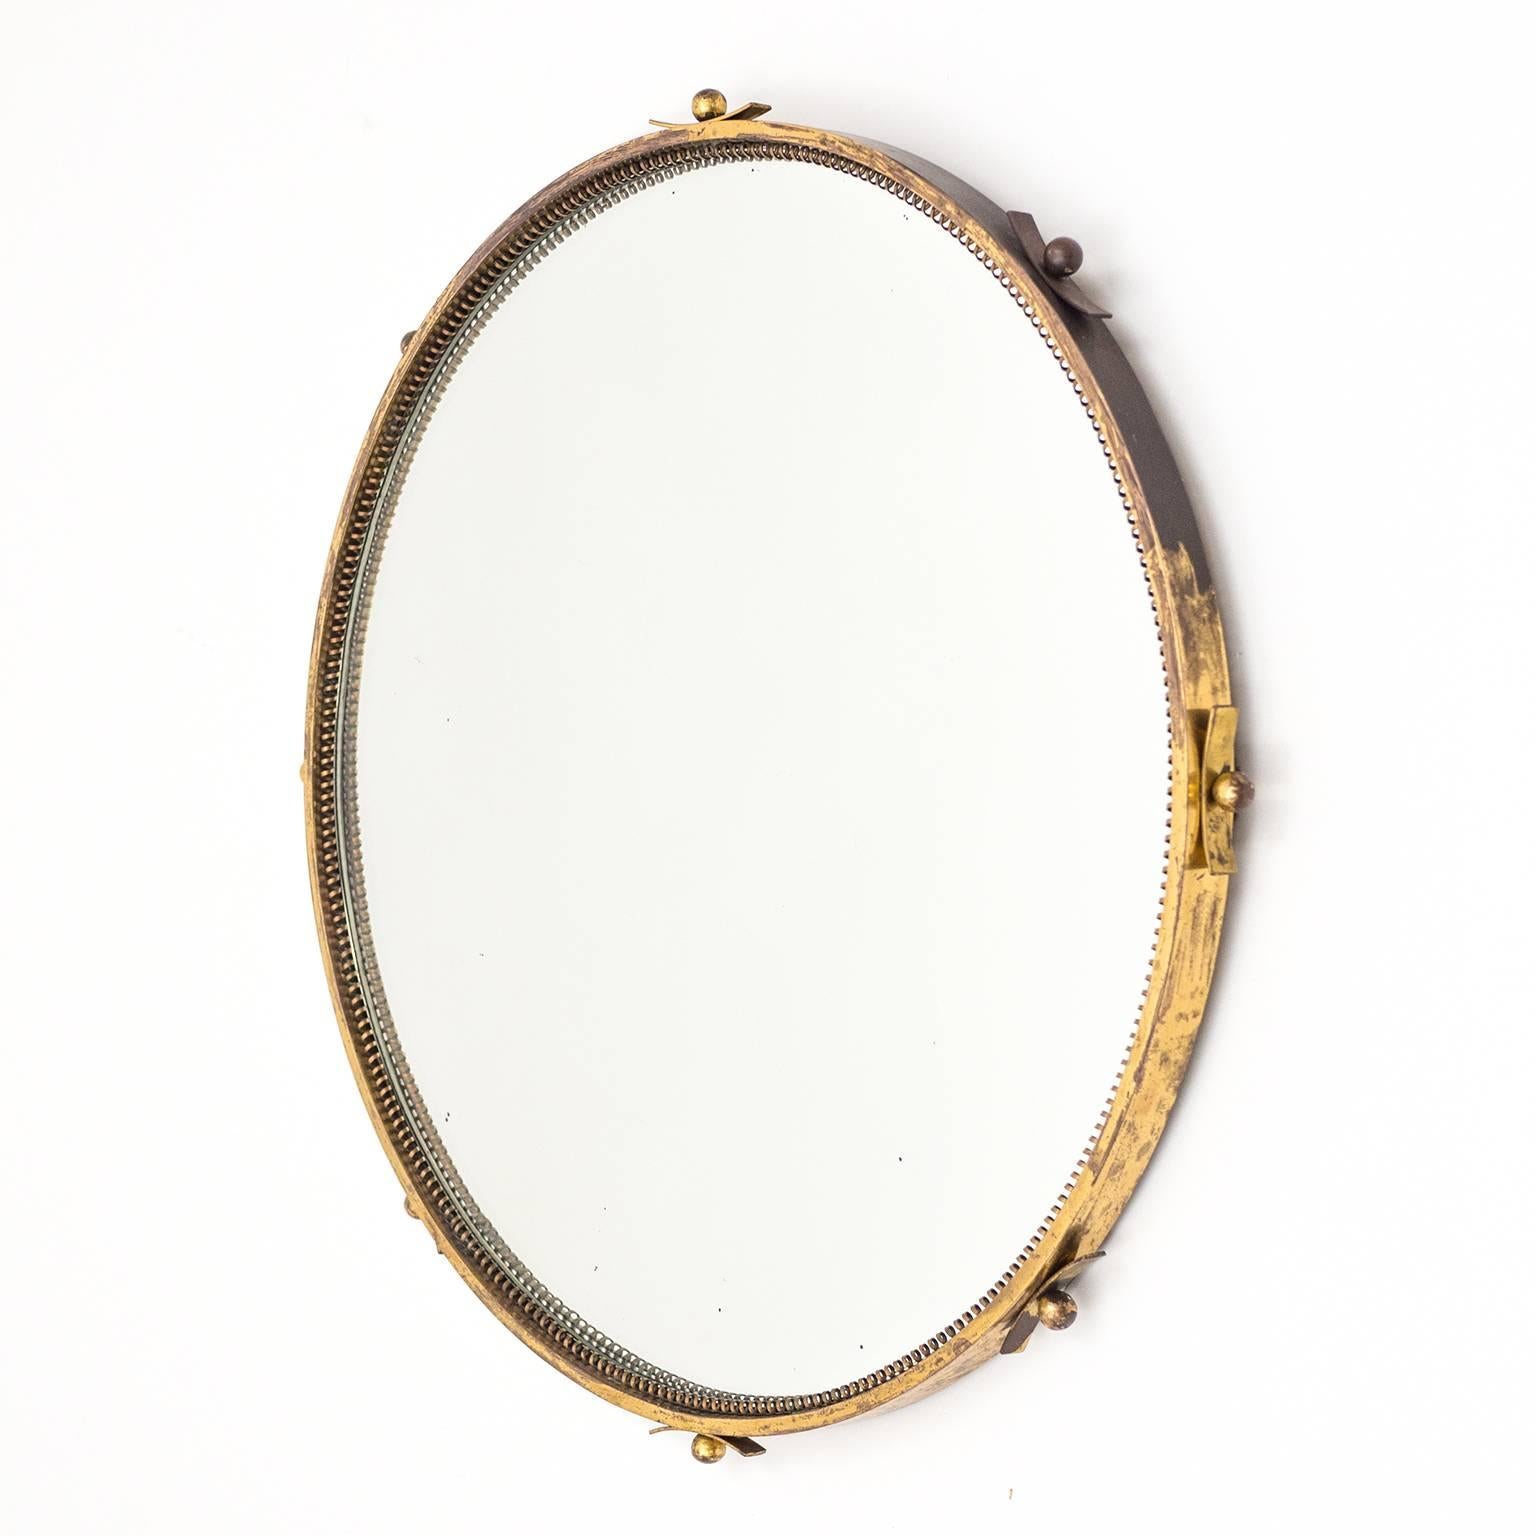 Lovely round brass Art Deco mirror from the 1930s. A thick solid brass rim (0.2inches / 5 mm) with brass details on the outside and a continuous brass 